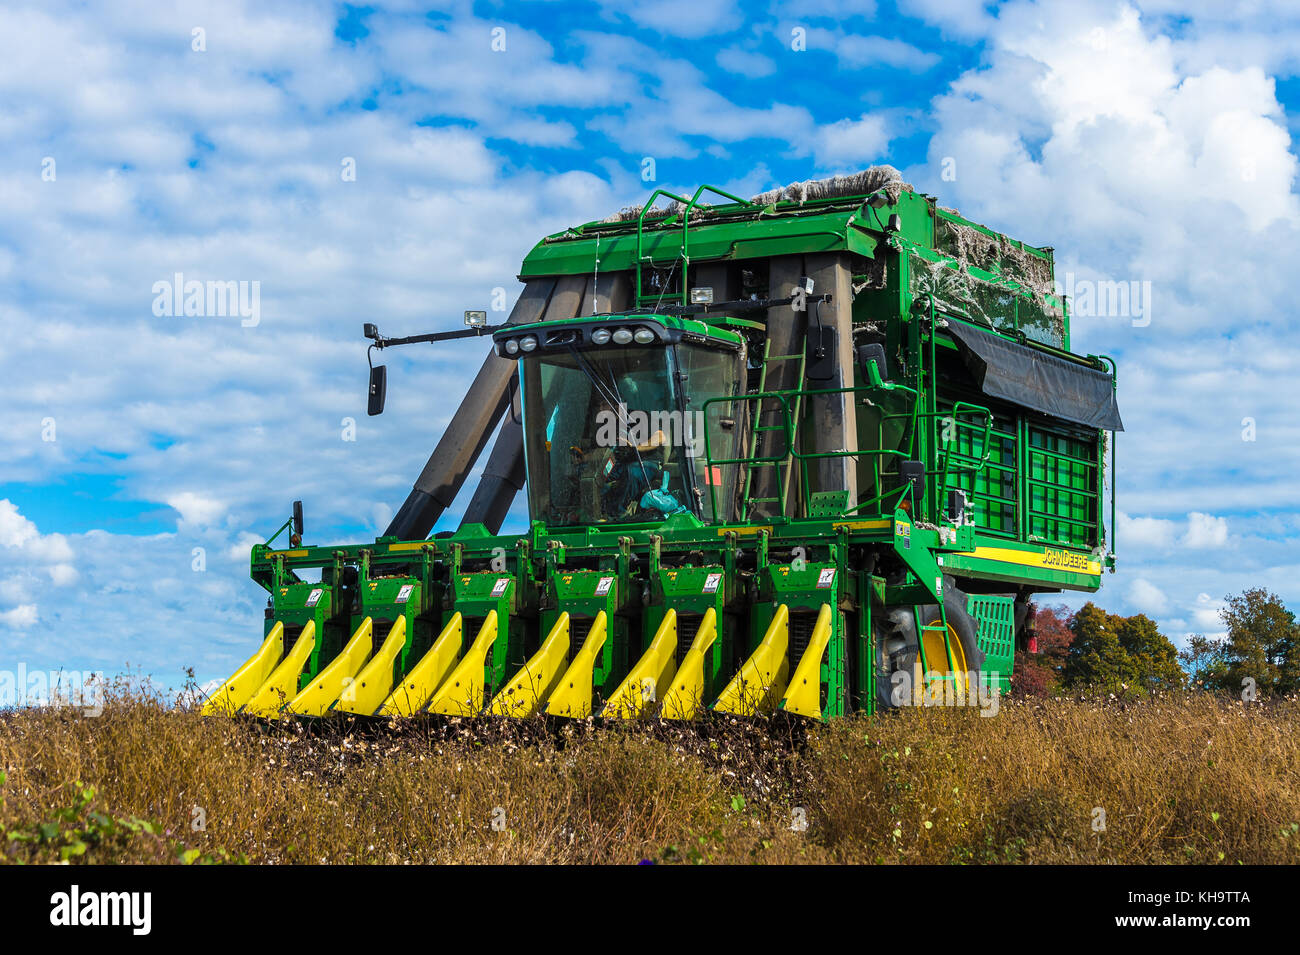 Skippers, Greensville County, Virginia,USA -November 2nd 2017; 'Spindle picker' type cotton harvesting machine, harvesting cotton Stock Photo